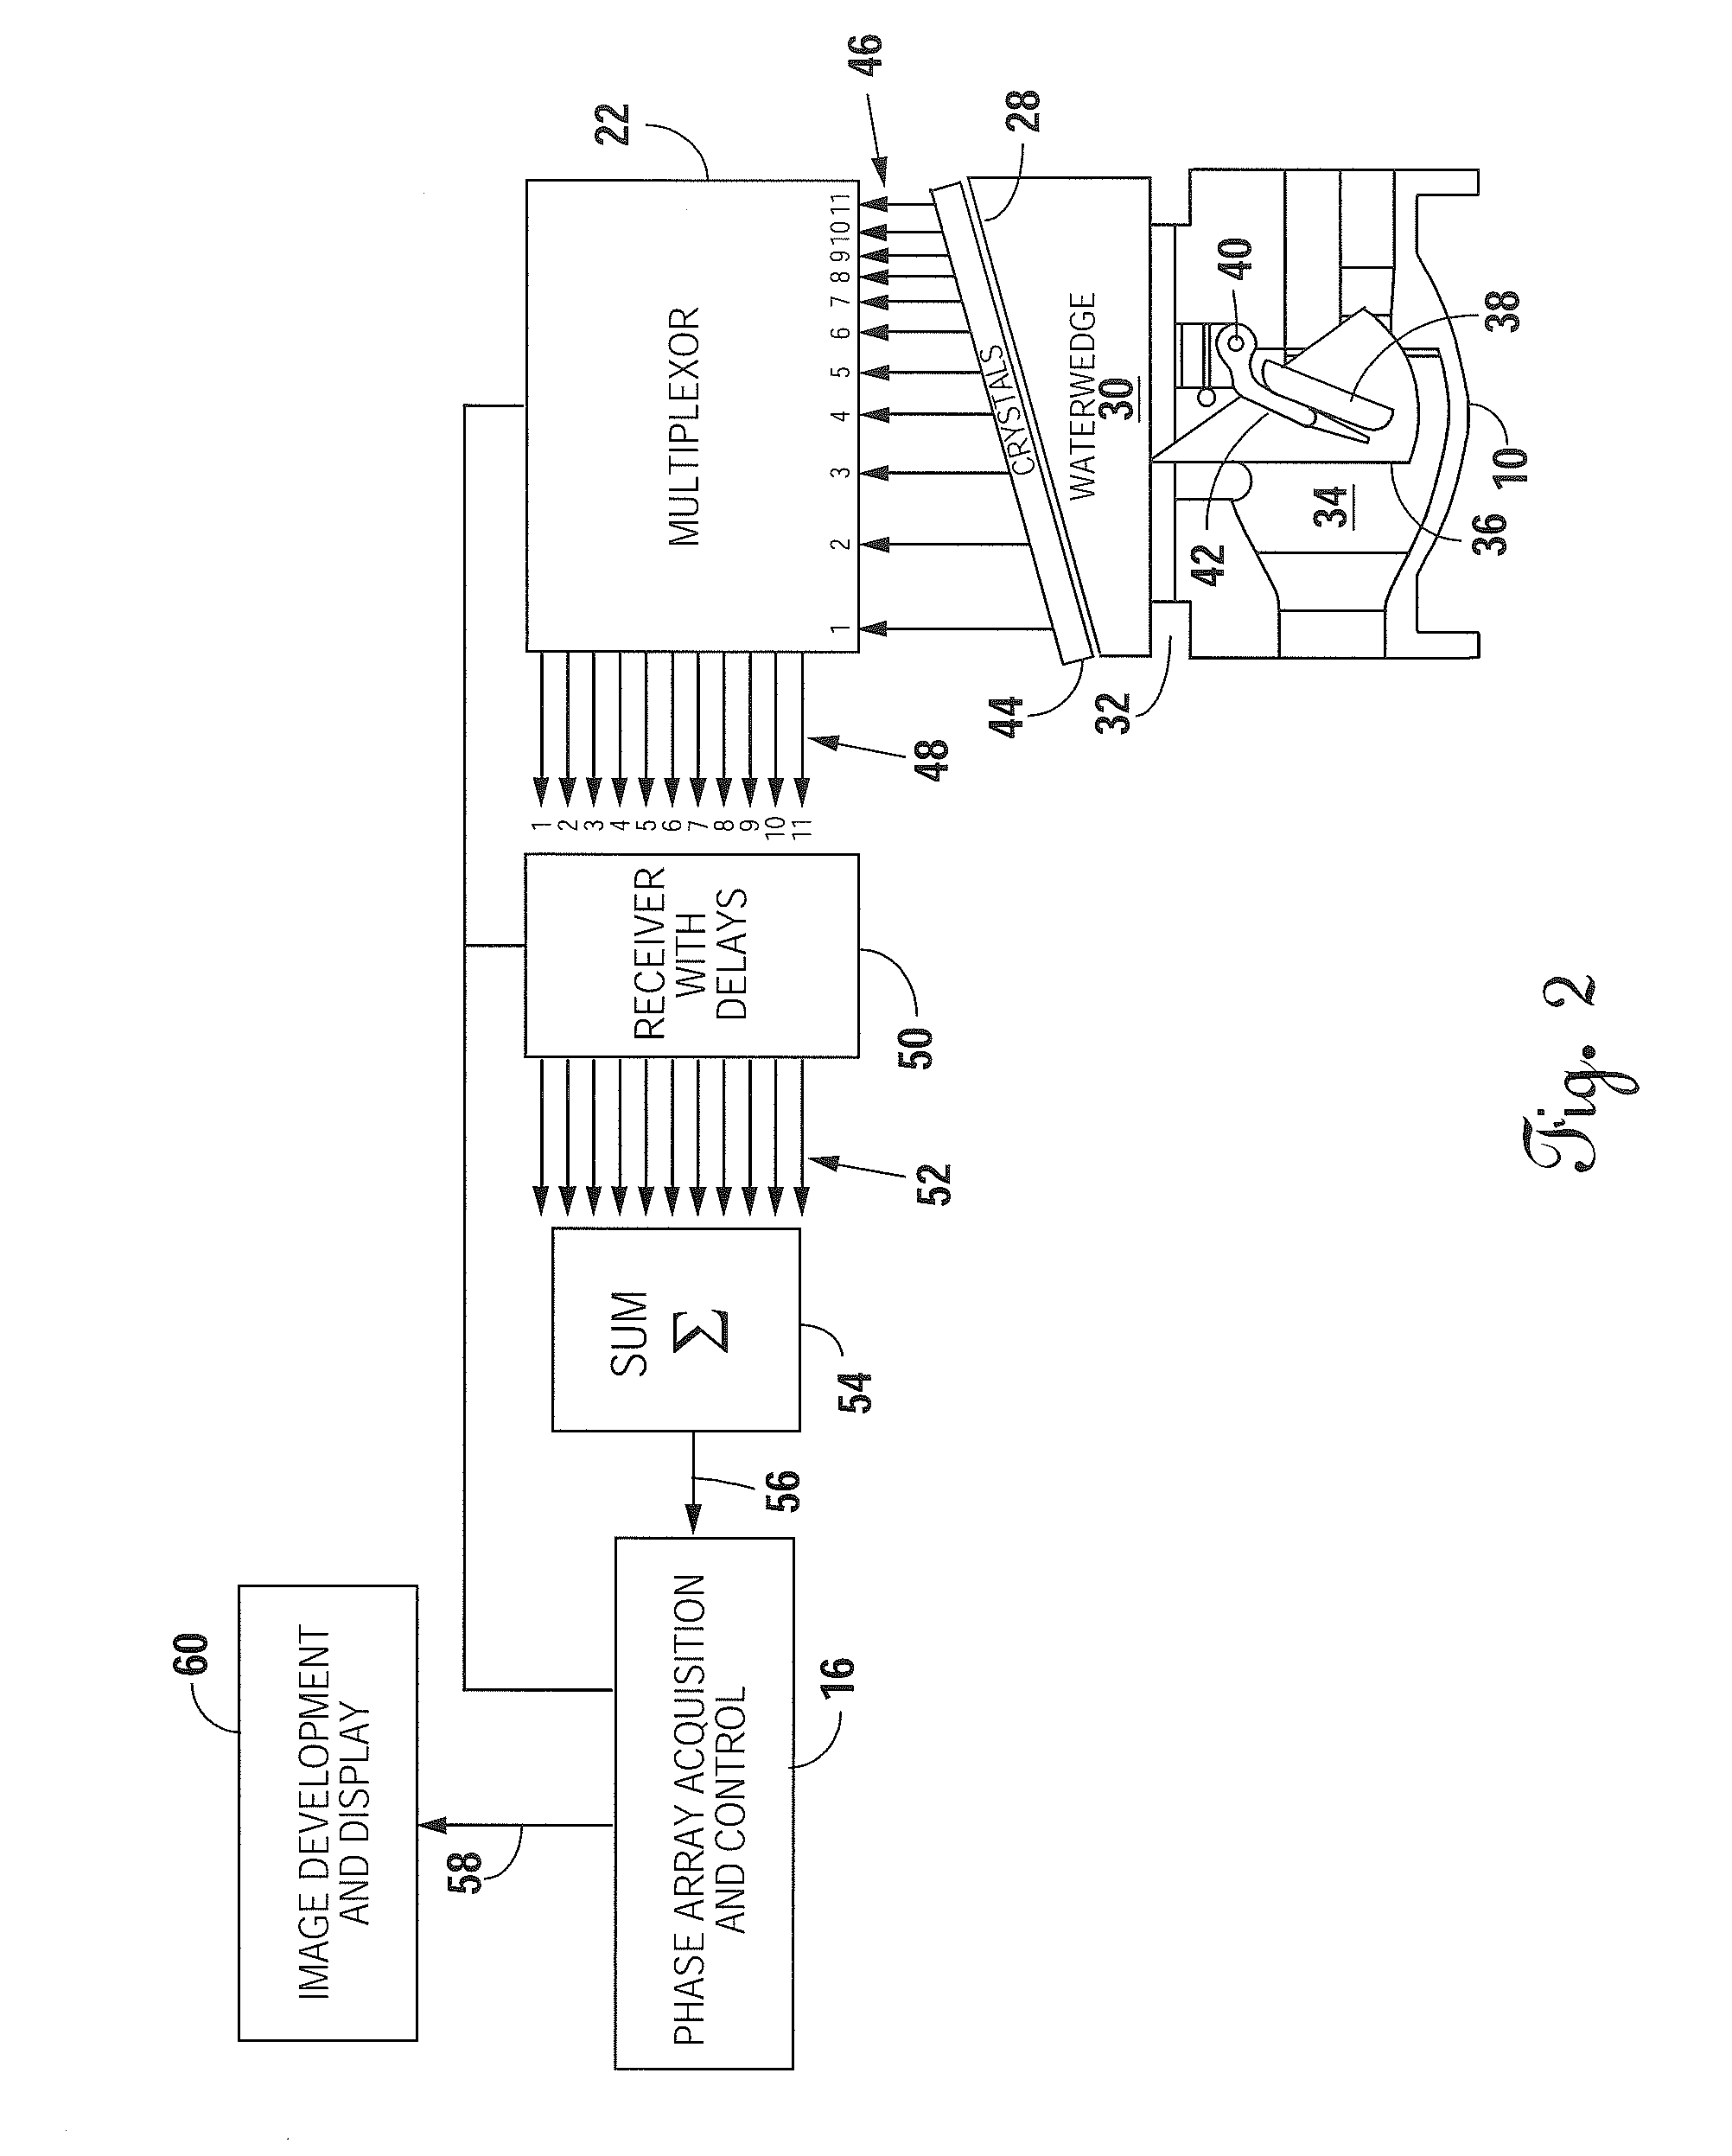 Visualization of tests on swing type check valve using phased array sequence scanning